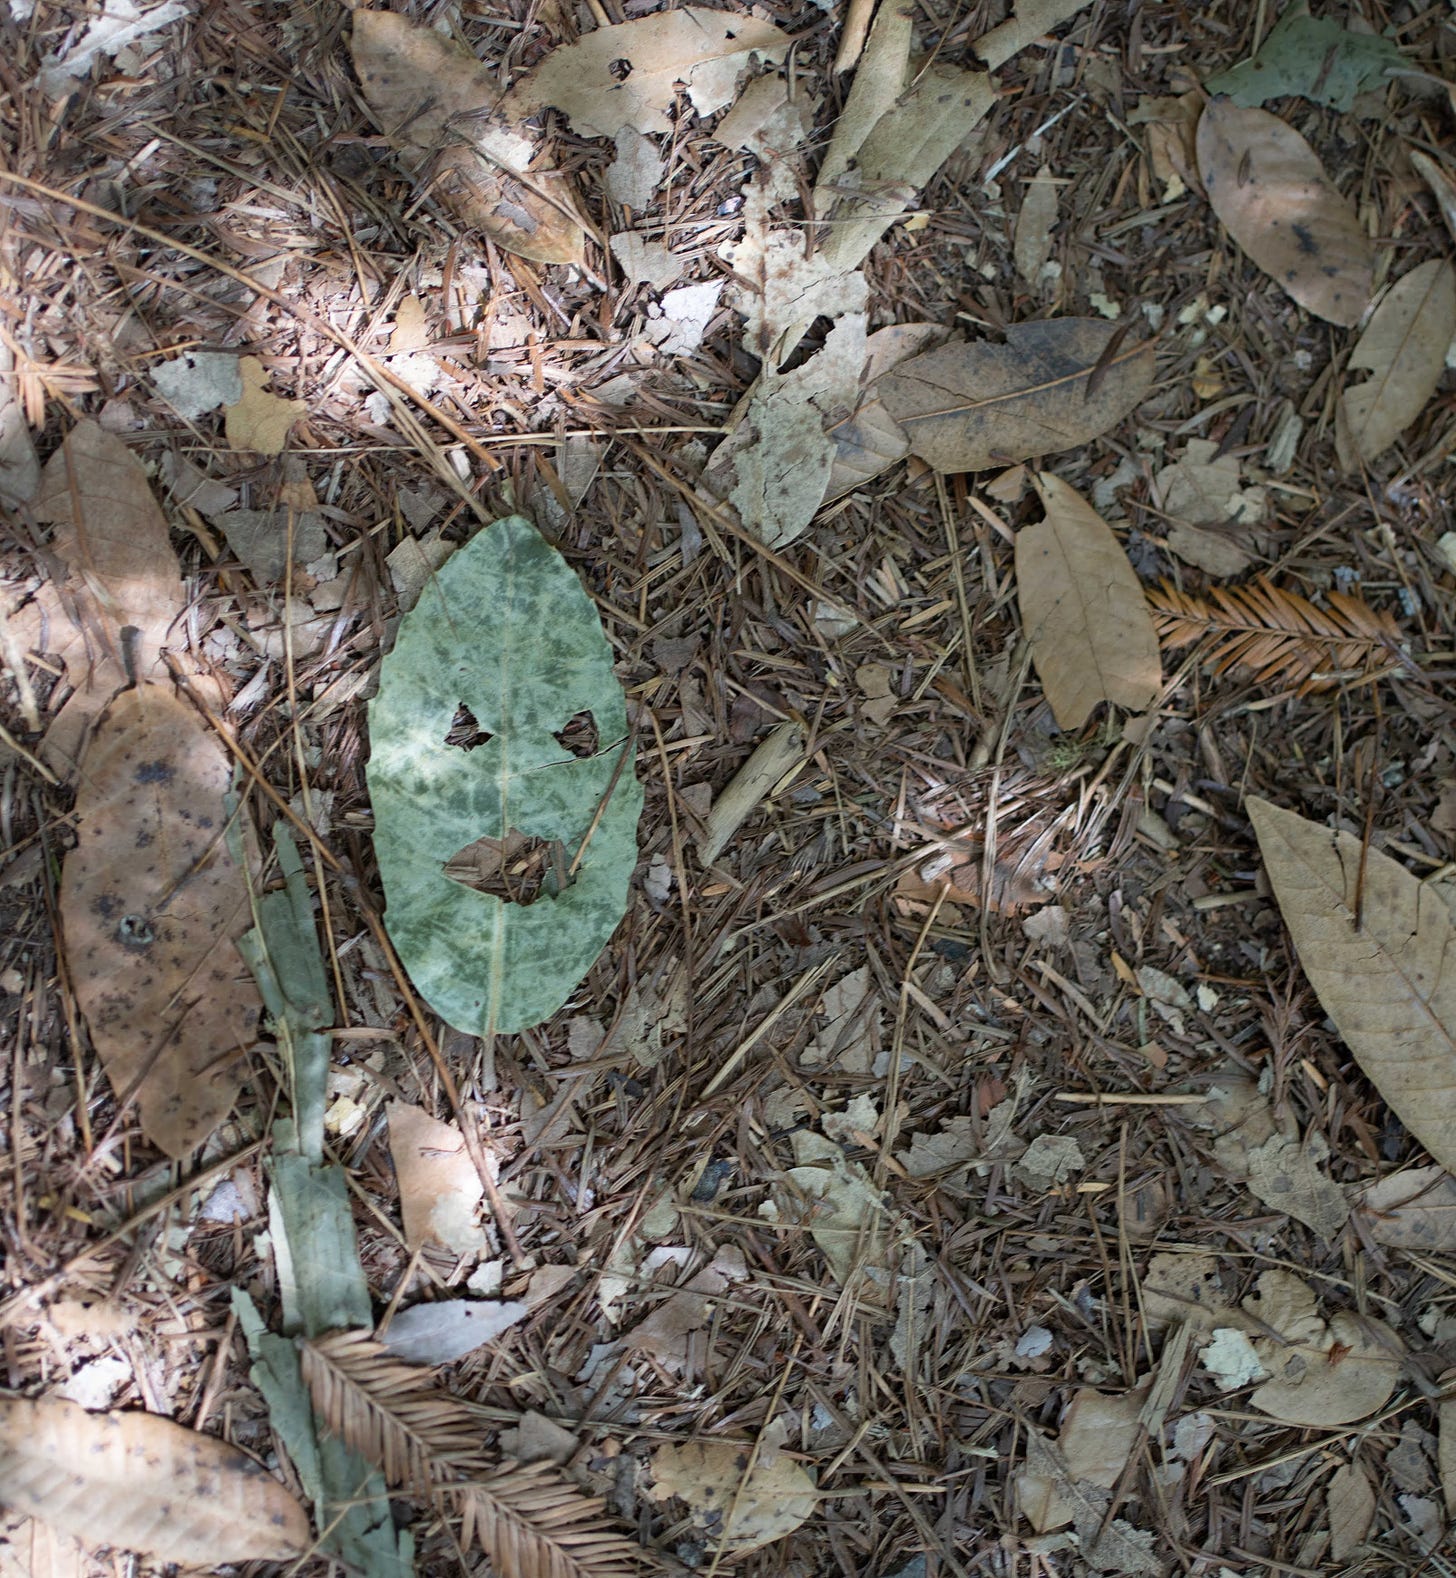 Photo of a green leaf fallen on the ground with holes in it that resemble a face. It sits amongst other dried leaves and dirt on the ground